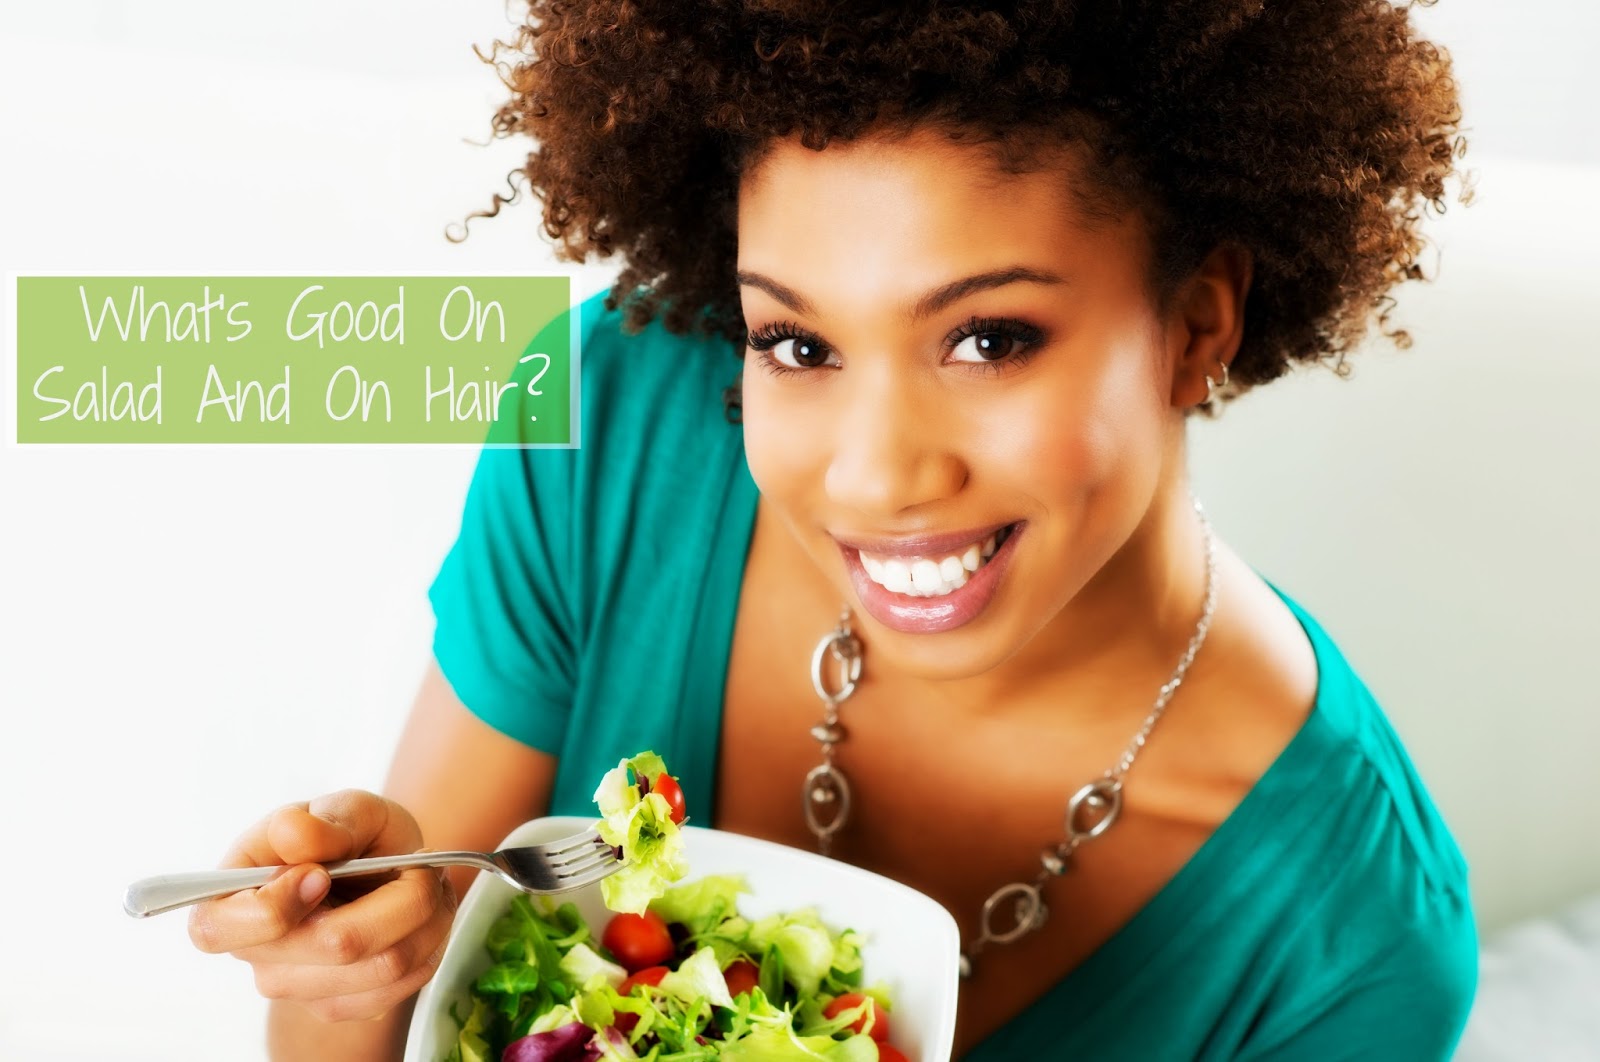 POP QUIZ: What's Good On Salad And On Hair? (Hint: It's Not Kale)